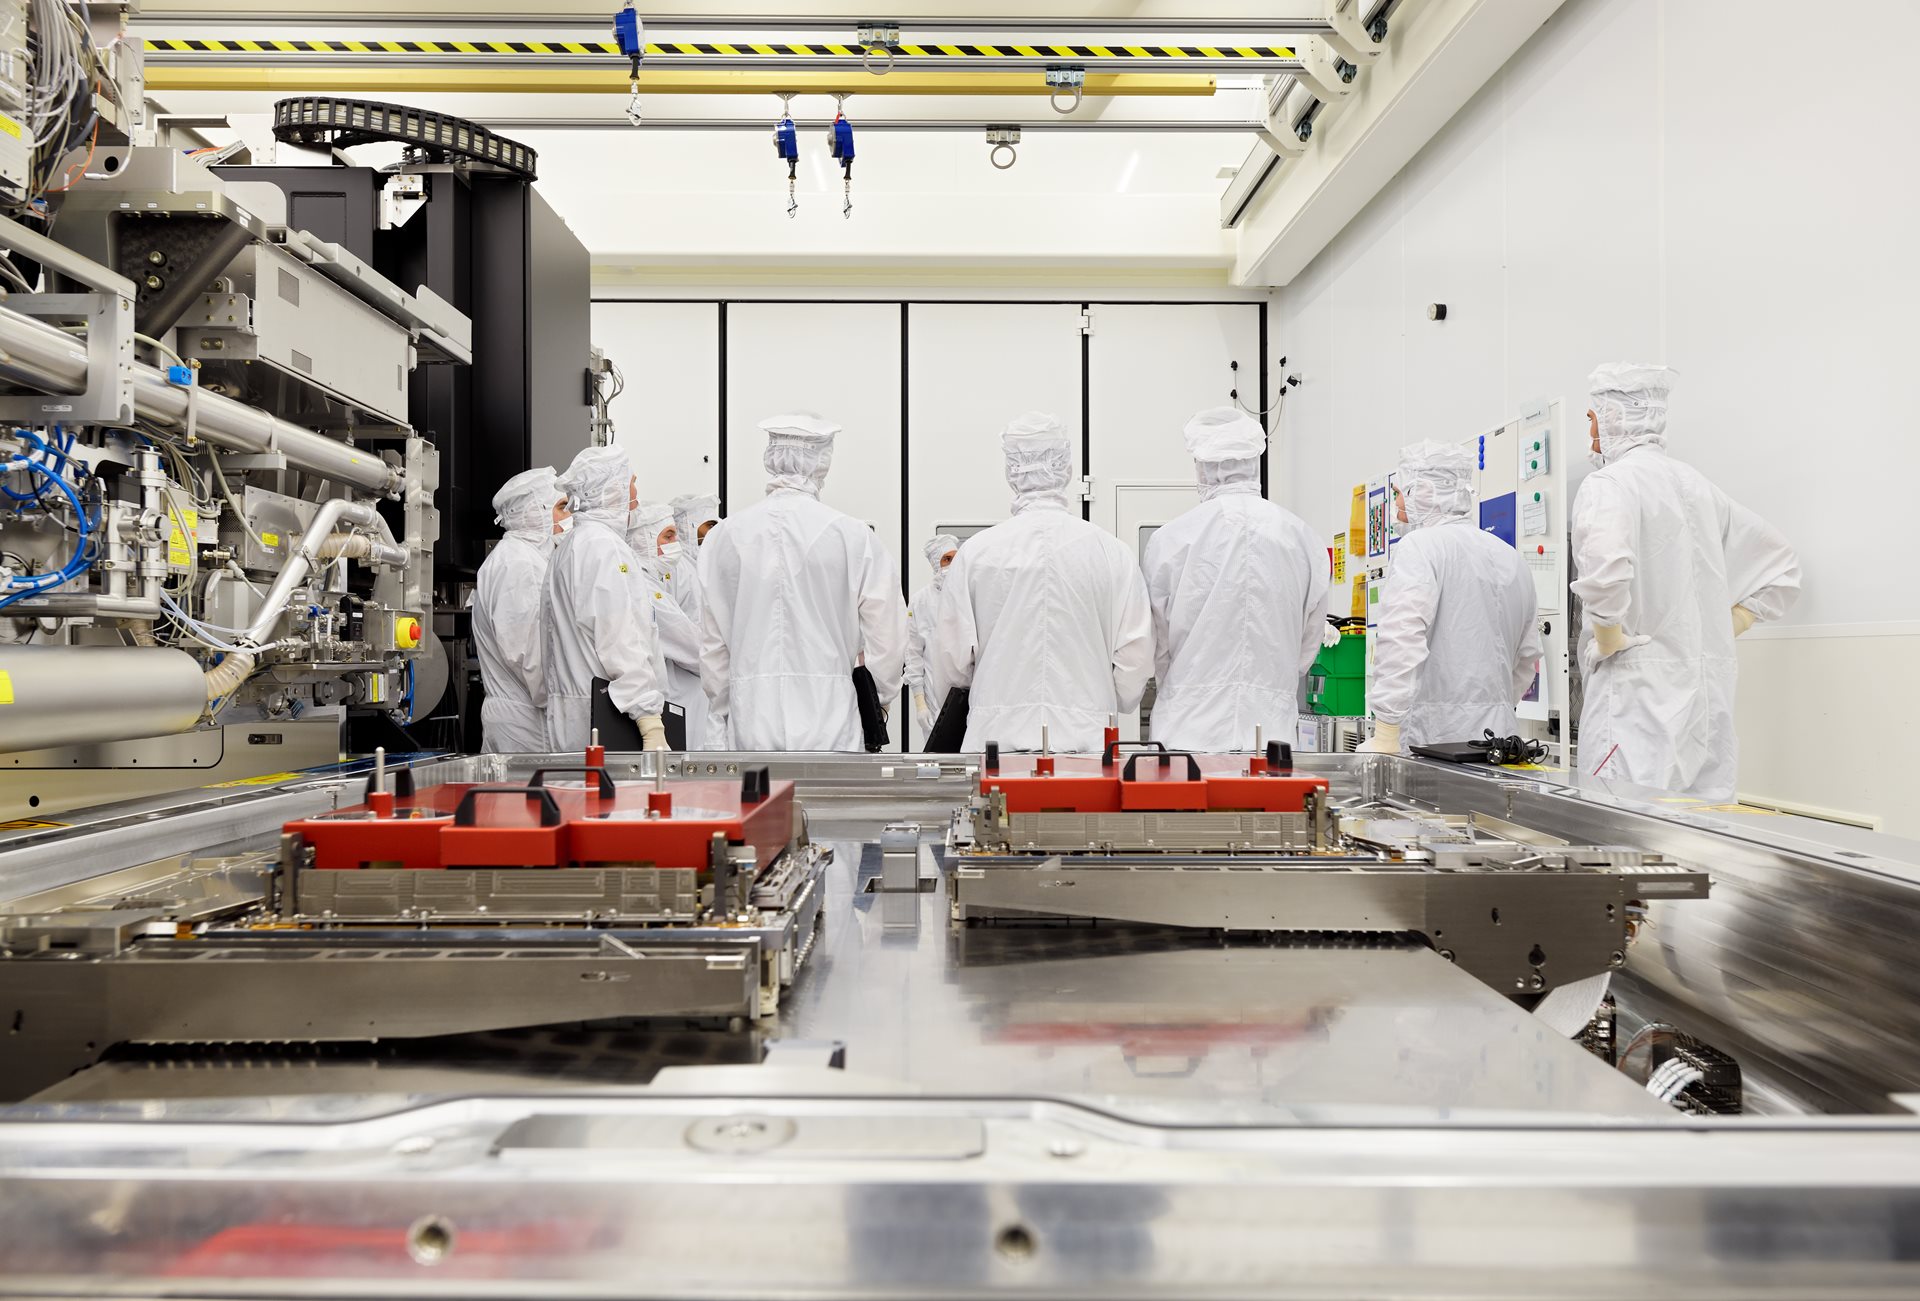 ASMLengineers work on EUV system, overlooking a wafer table.